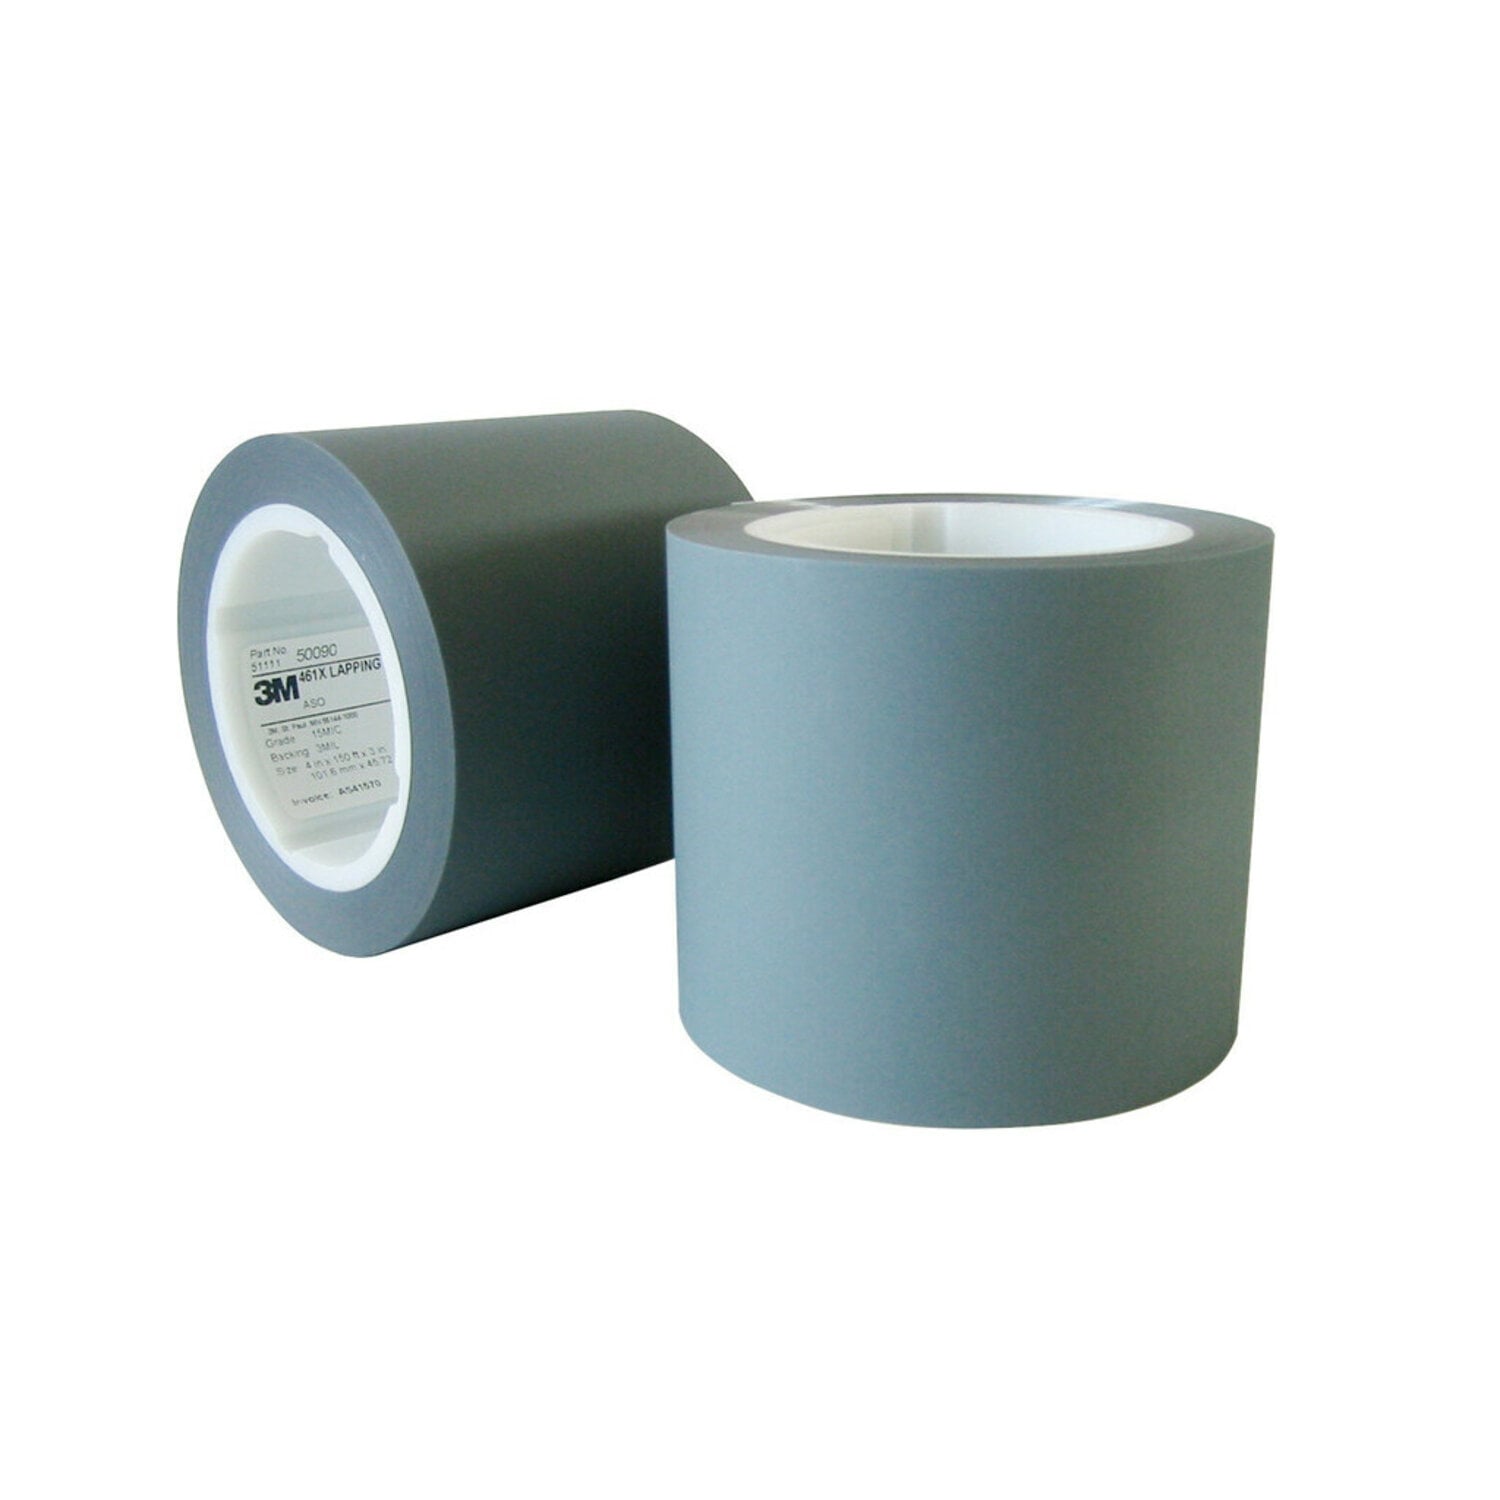 3M Electrically Conductive Adhesive Transfer Tape 9706, 4 in x 10 yds